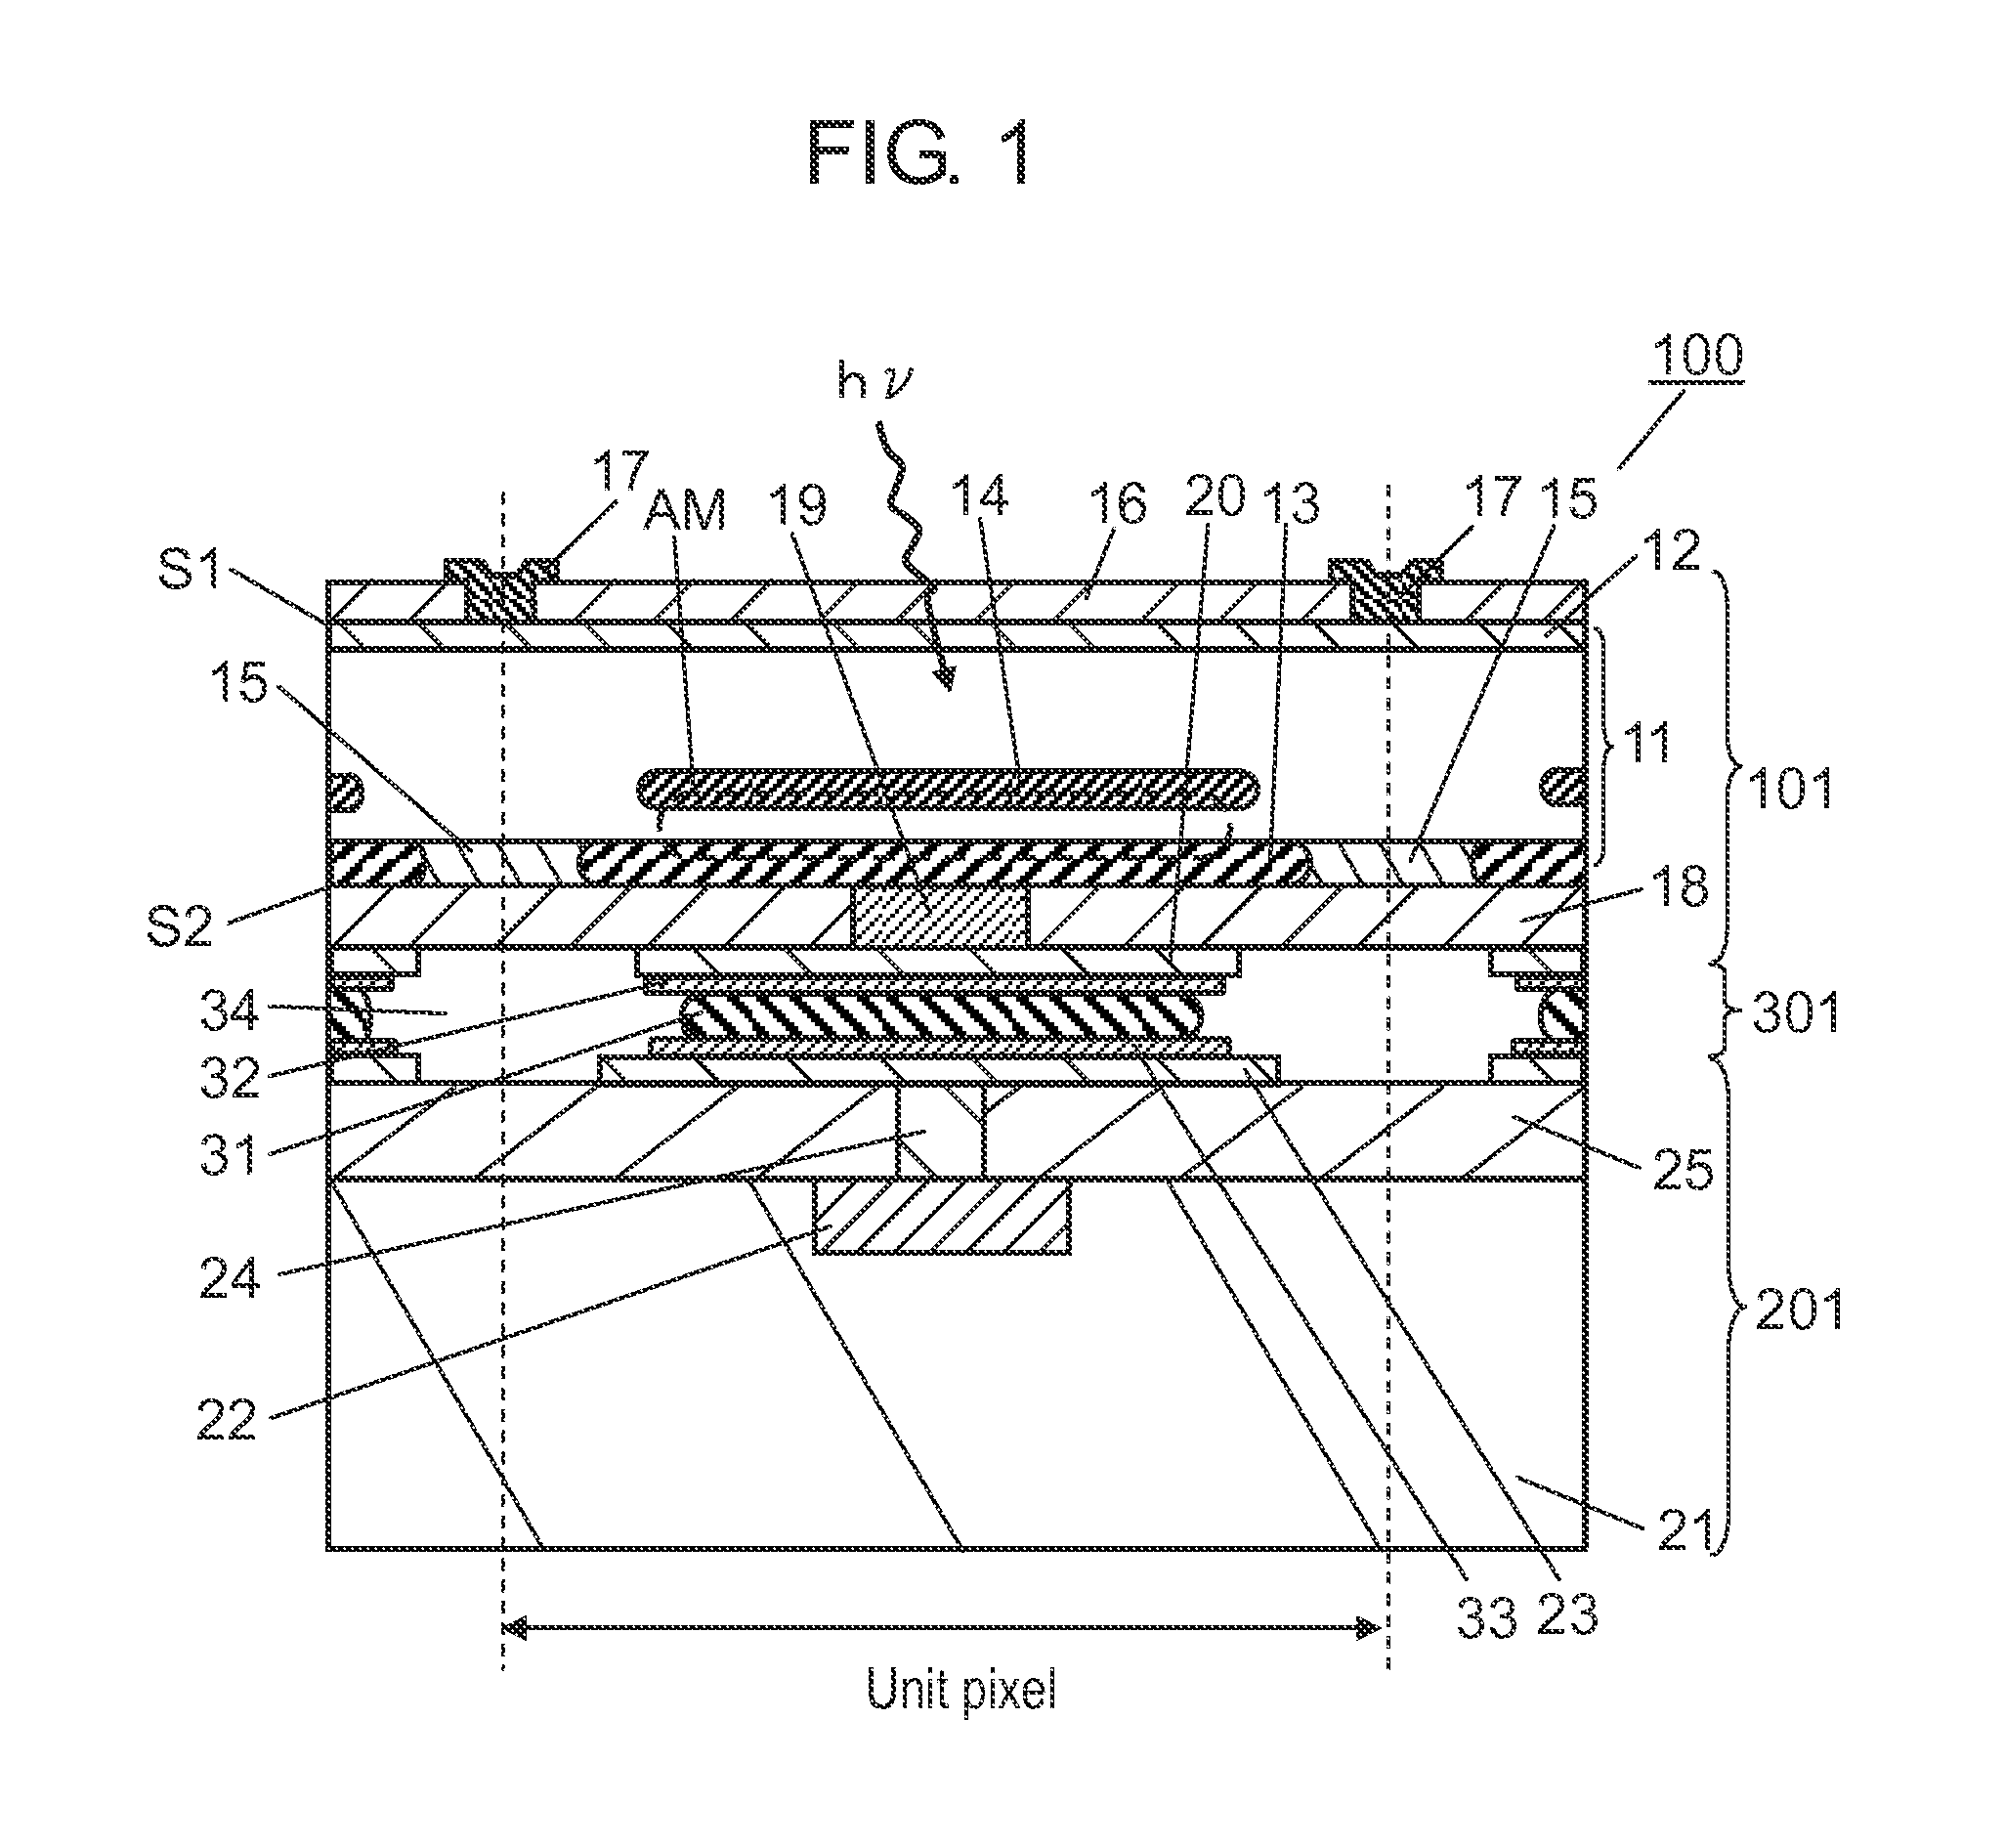 Semiconductor photodetector